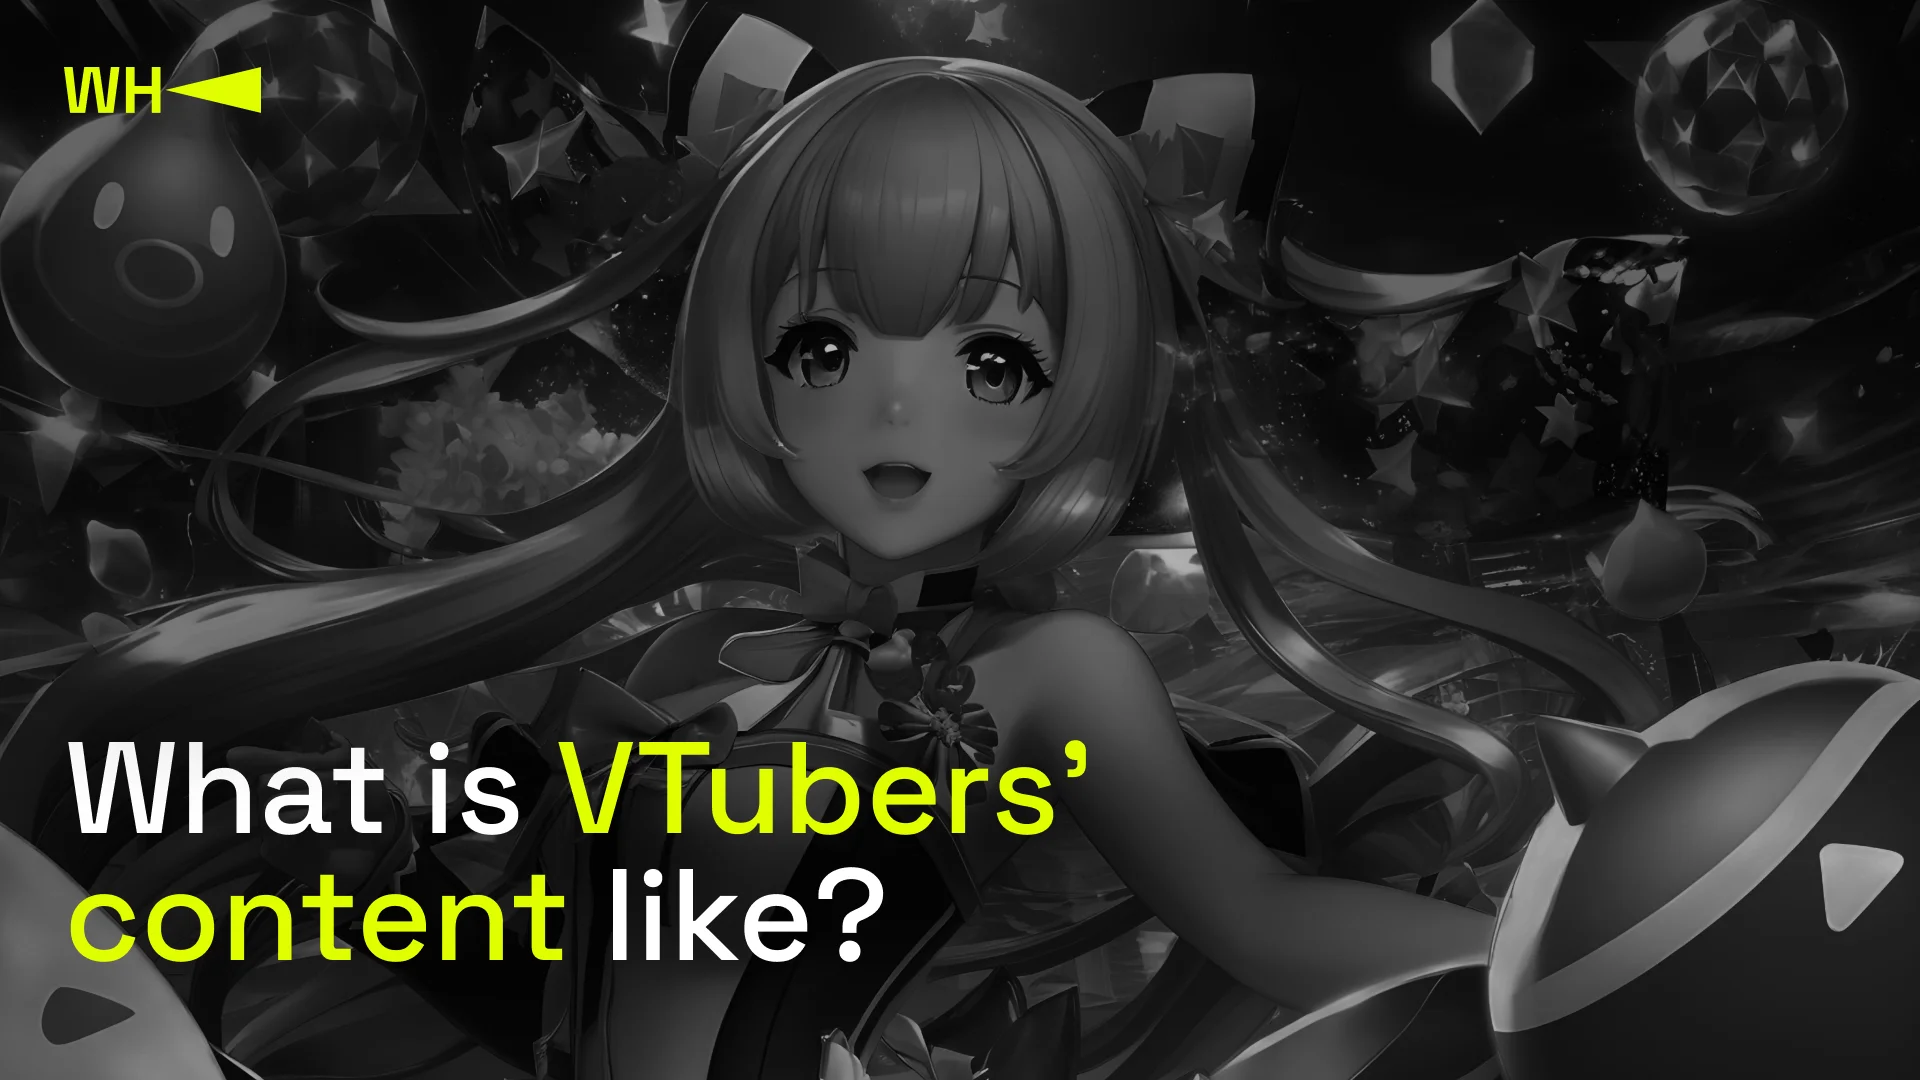 What is VTubers’ content like?